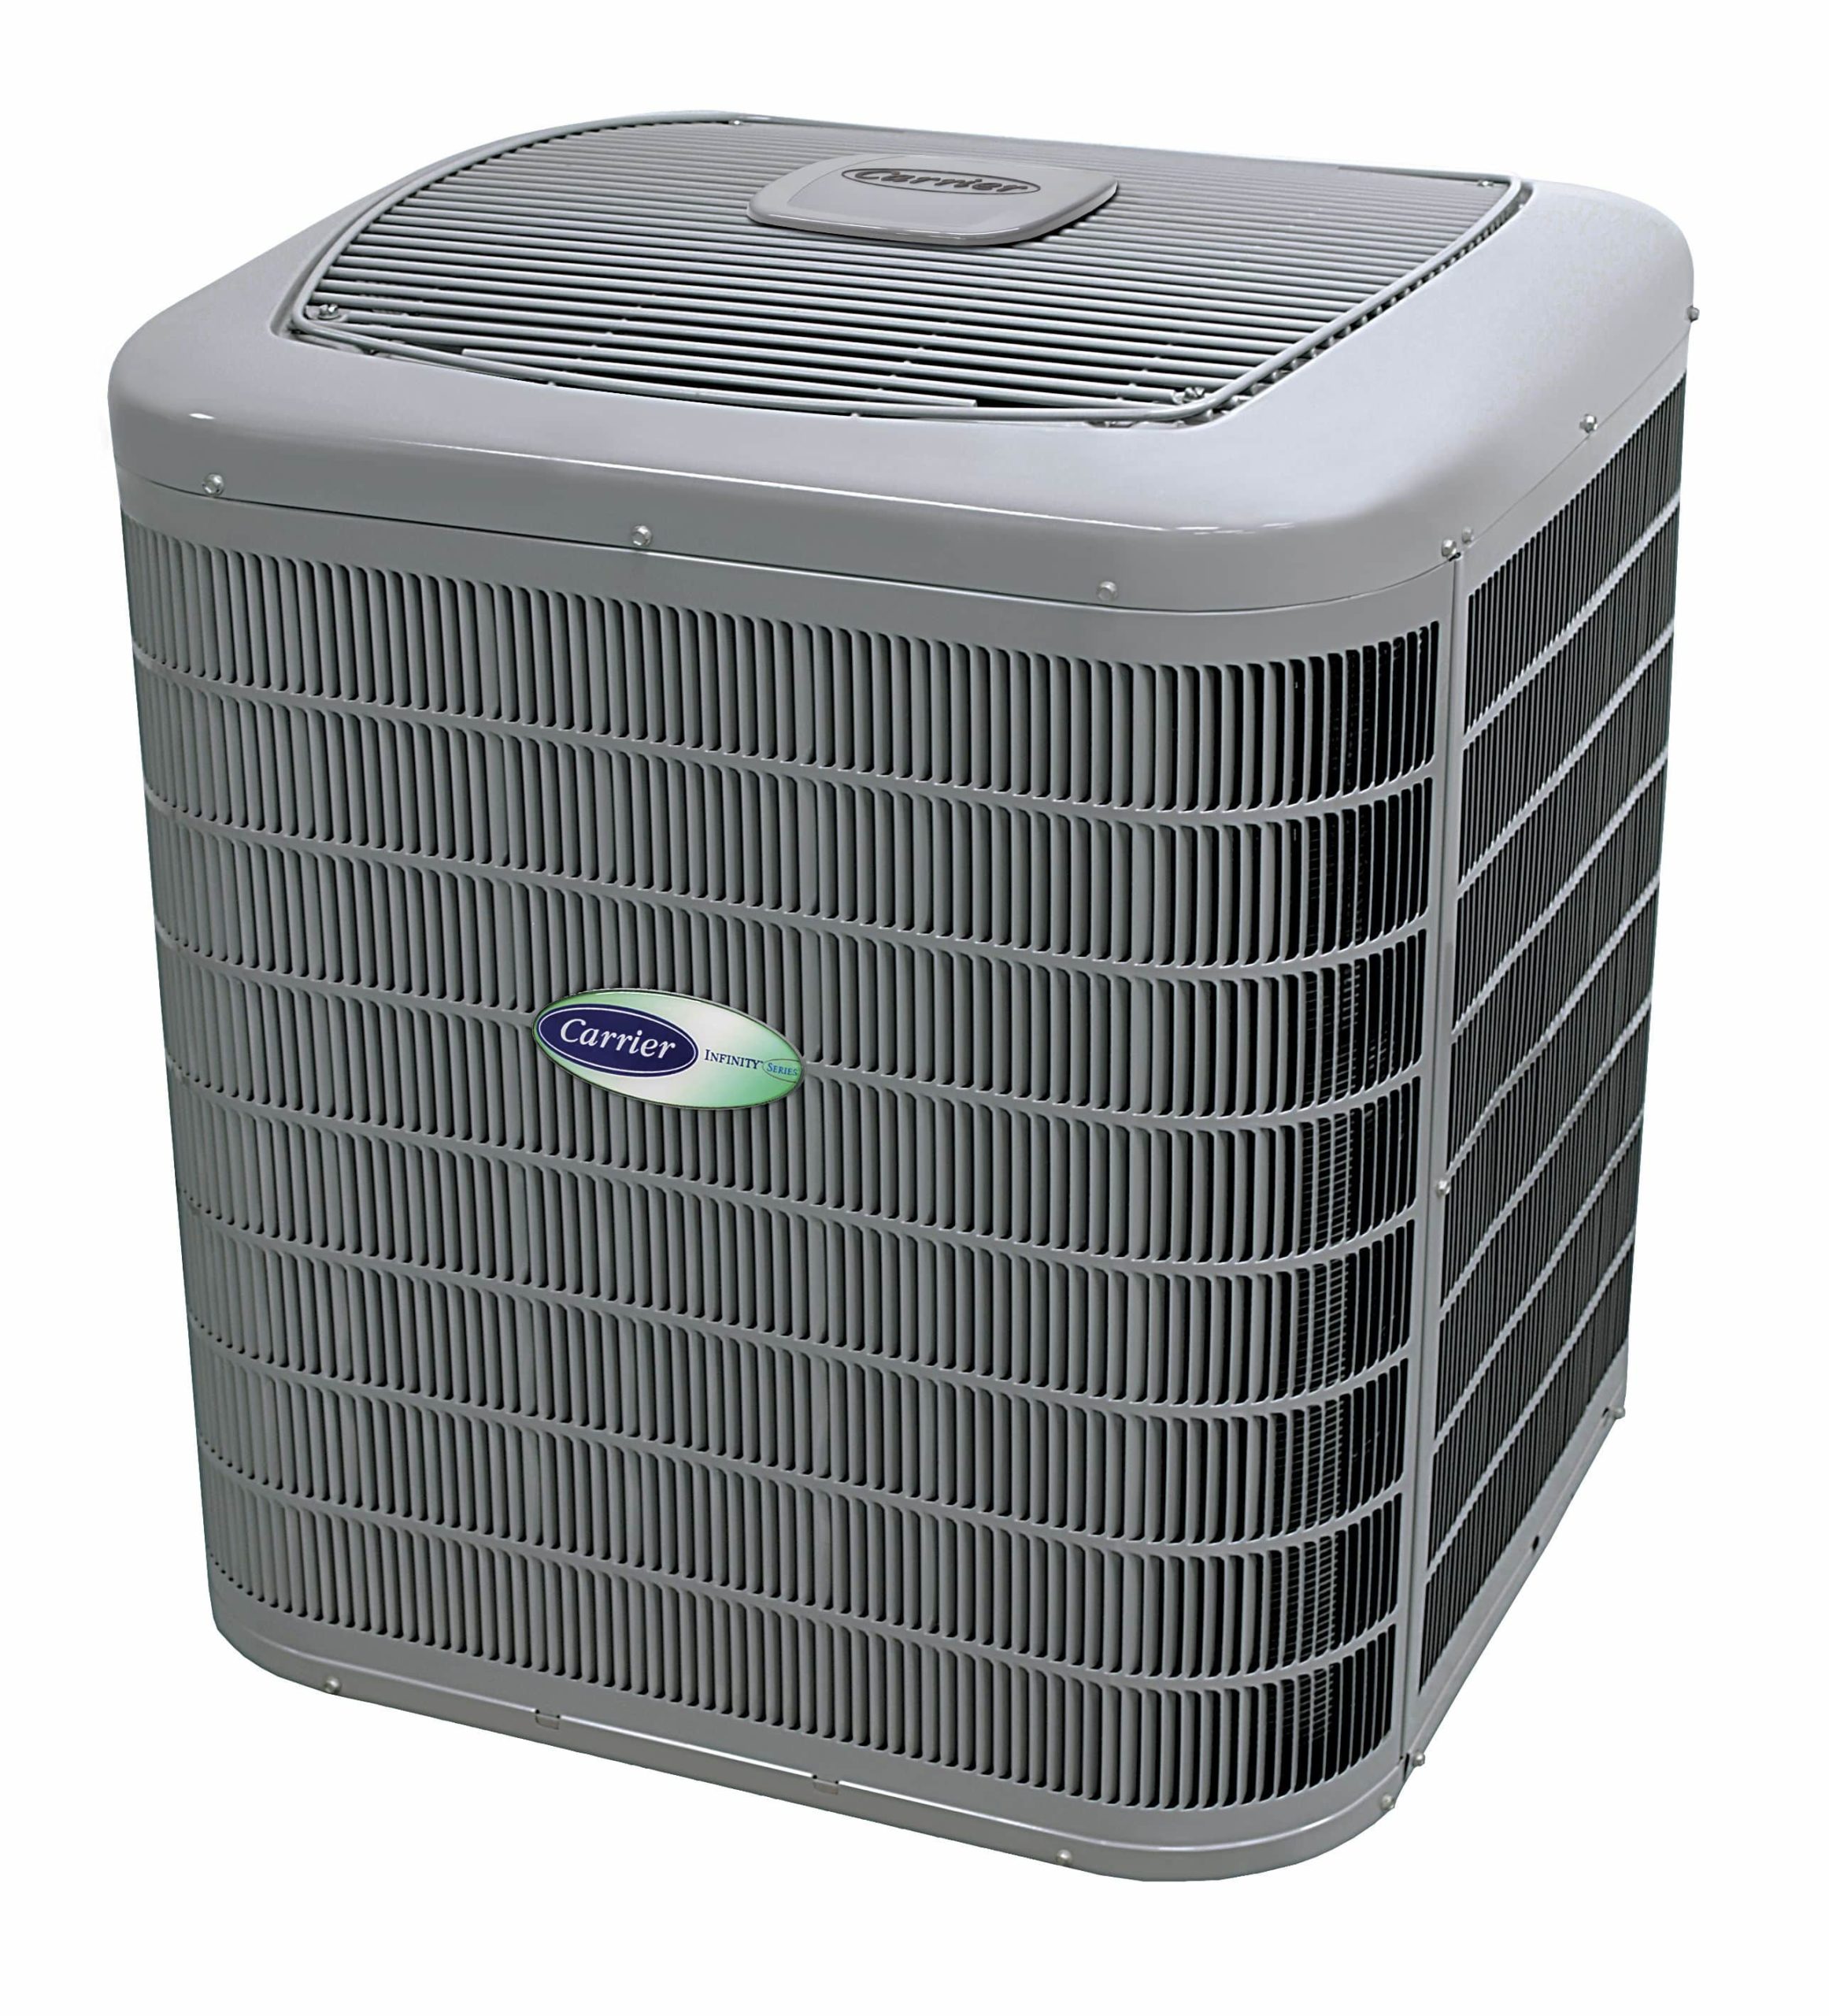 Carrier infinity AC unit